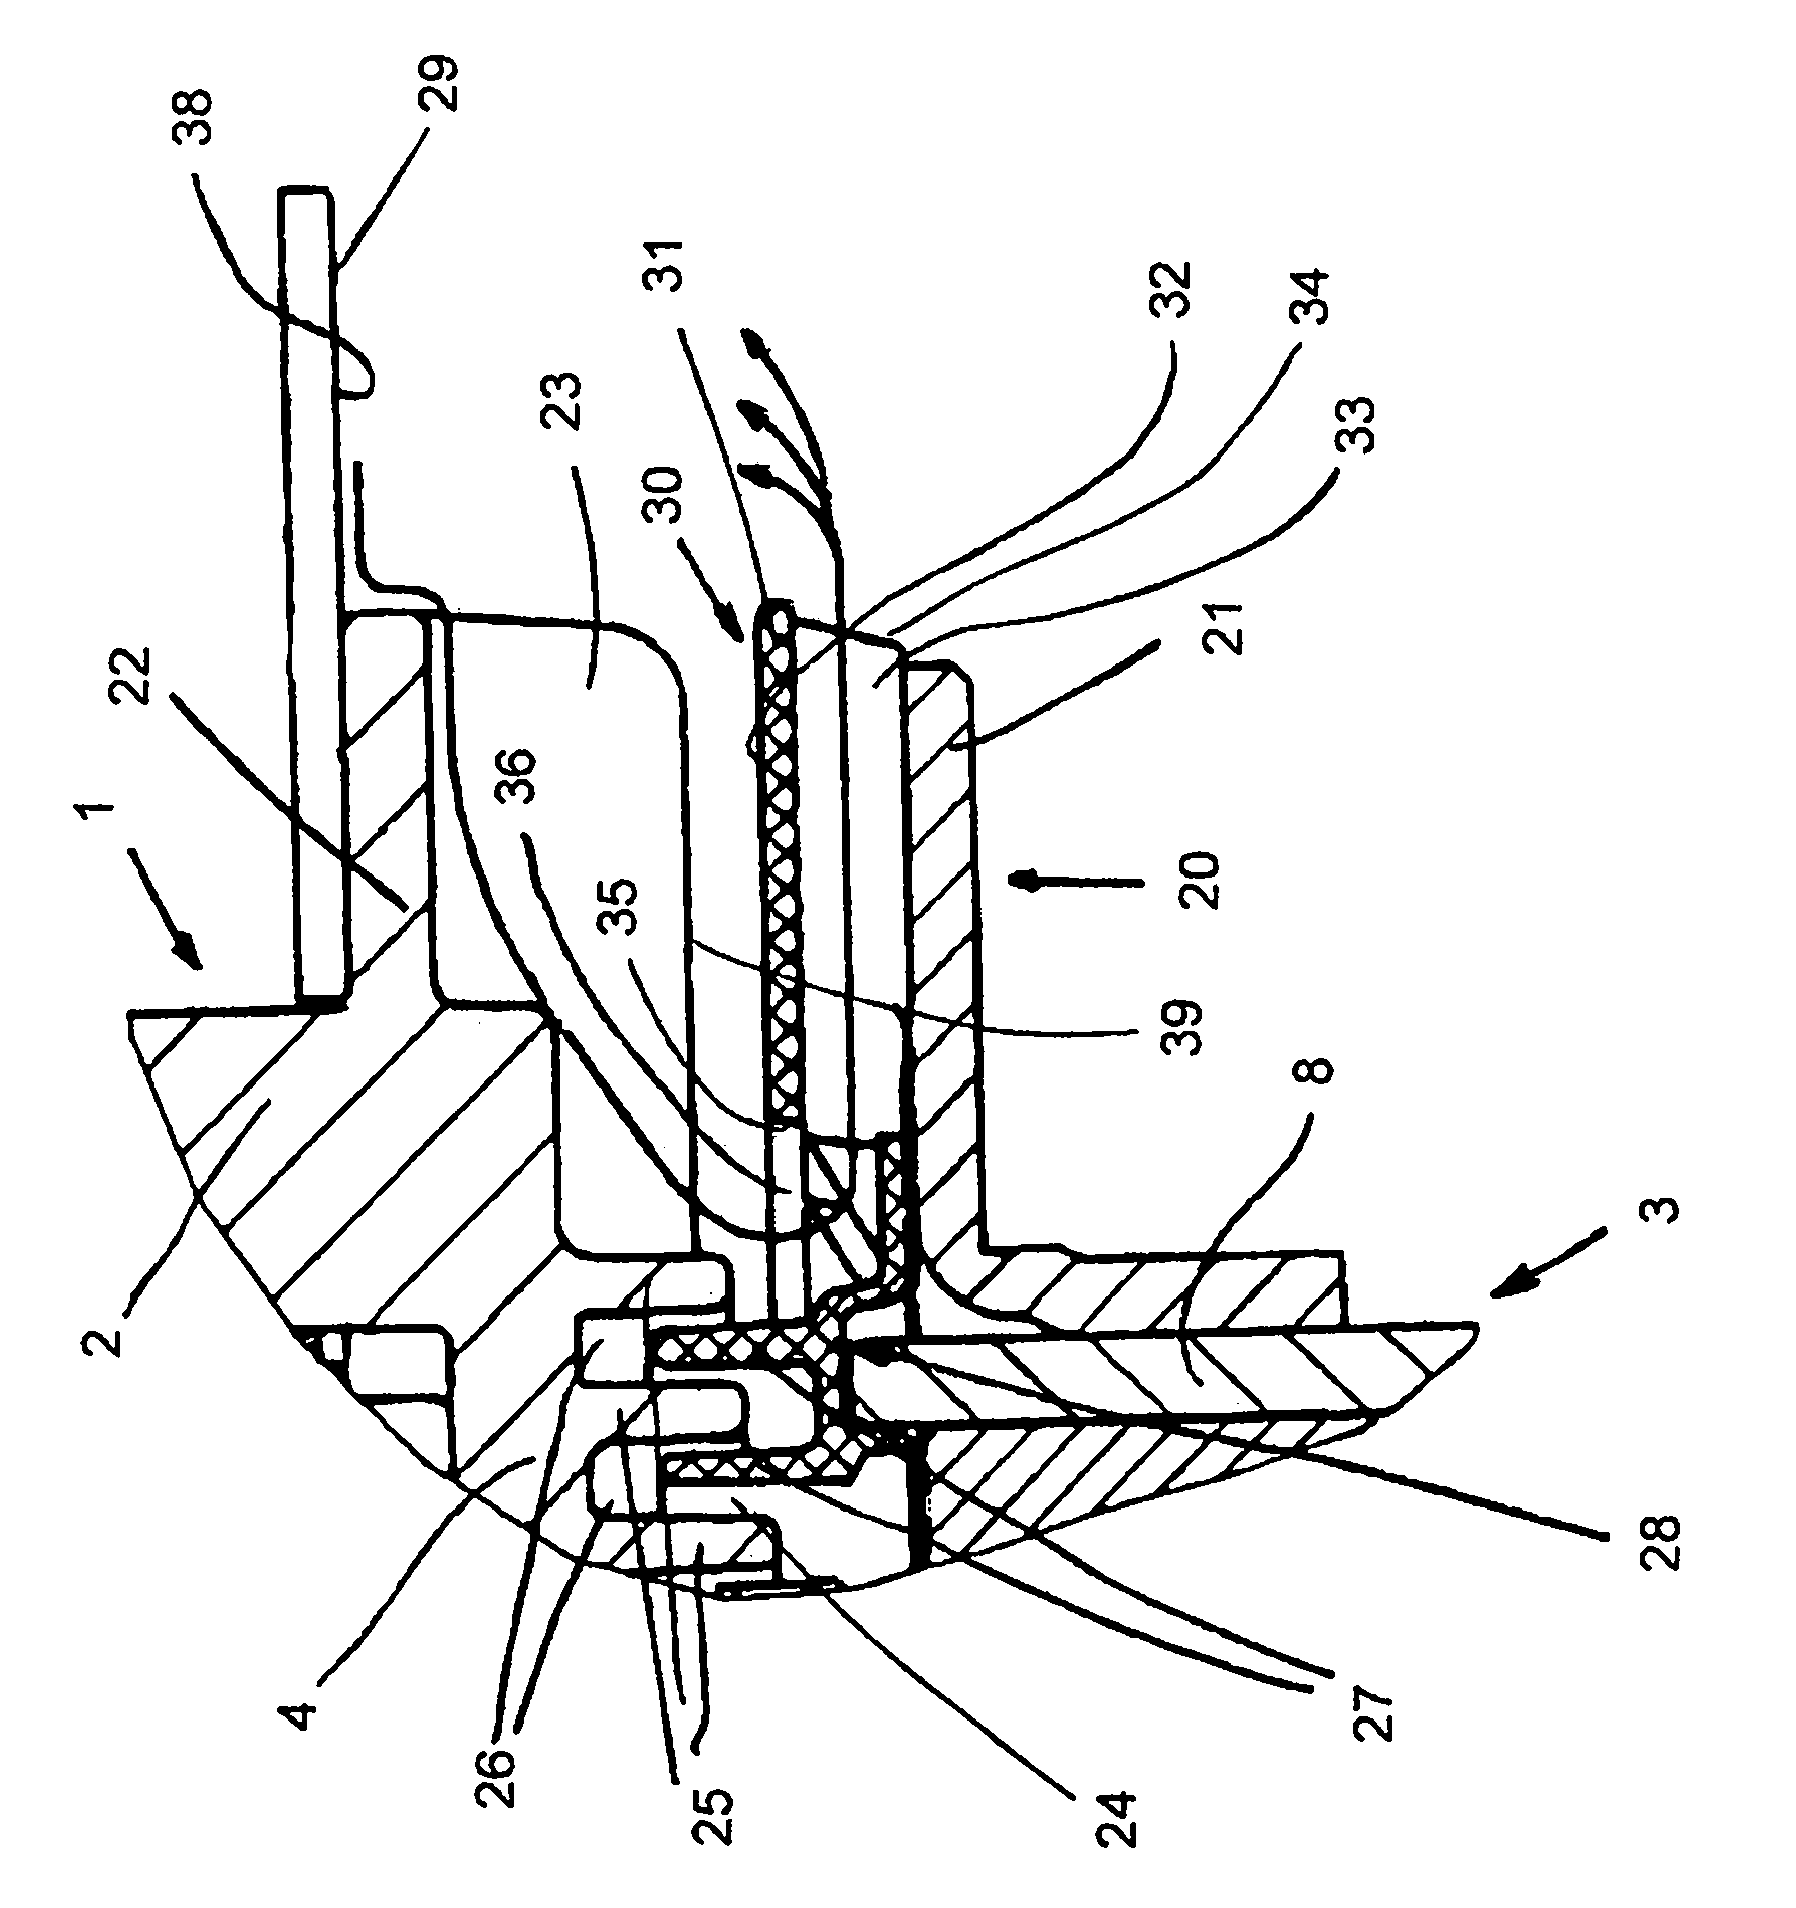 Electric motor, particularly outer rotor motor